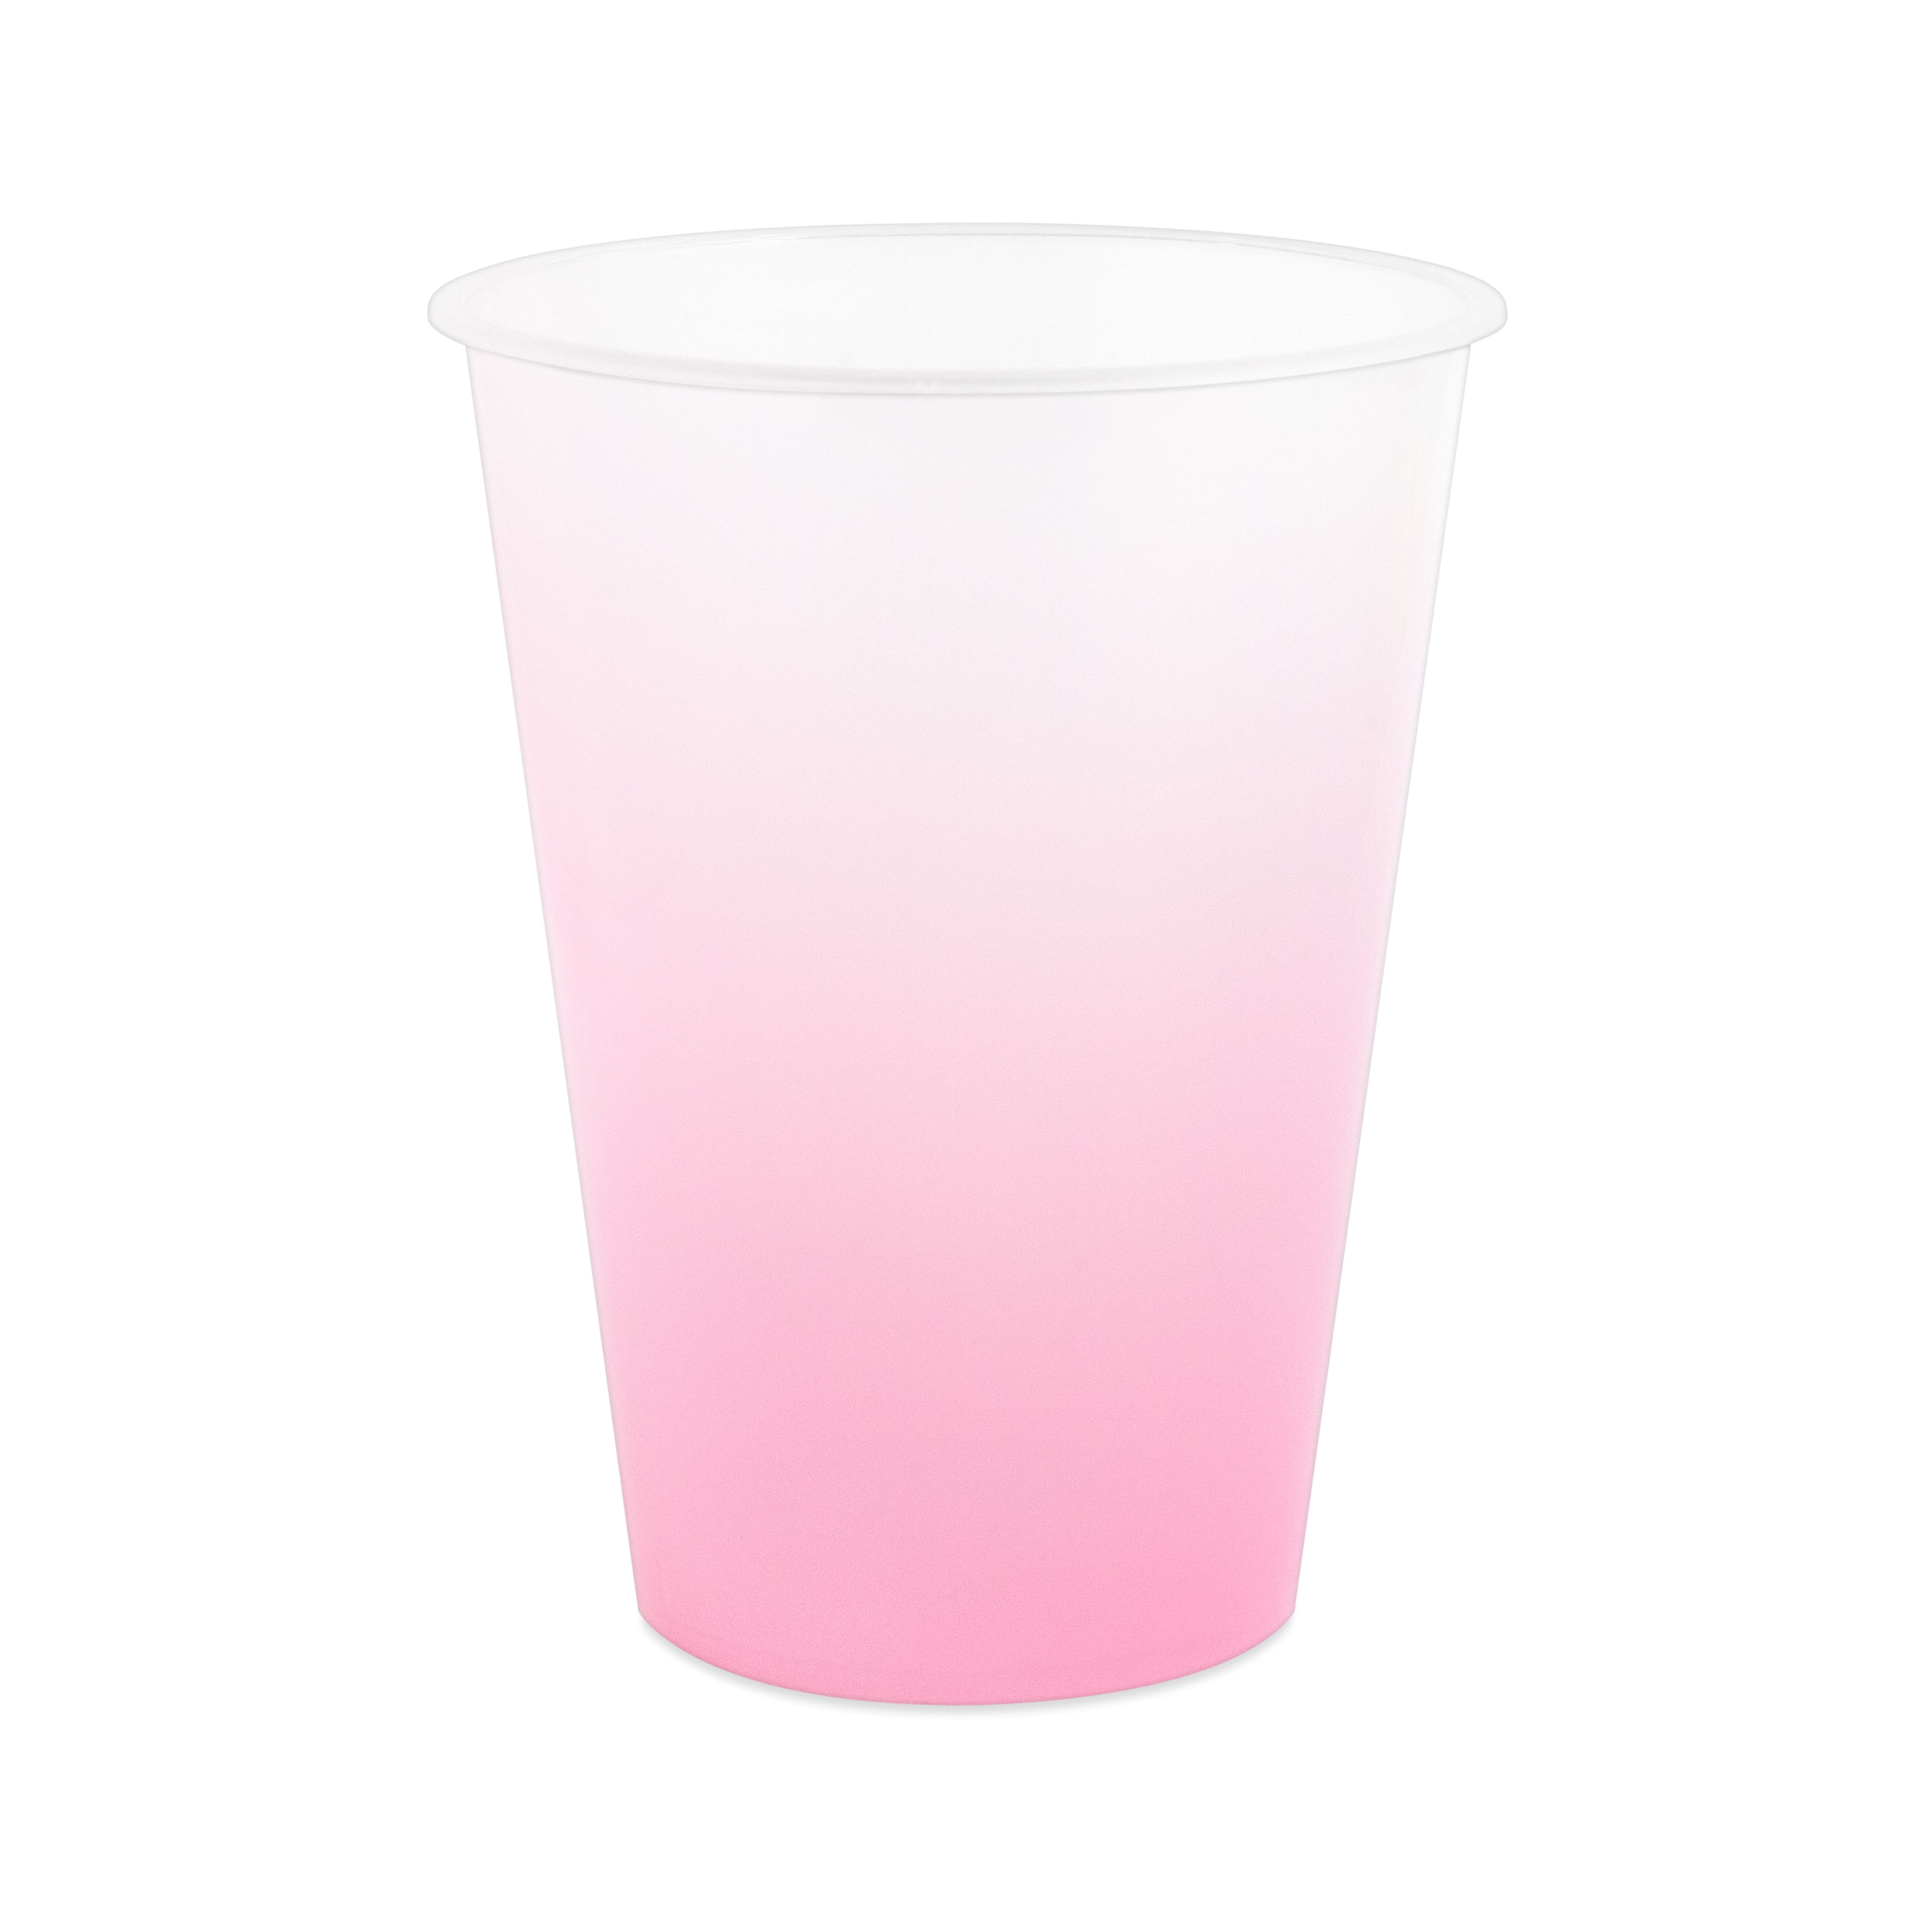 Smarty Had A Party 10 oz. Clear Round Plastic Cups (600 Cups)